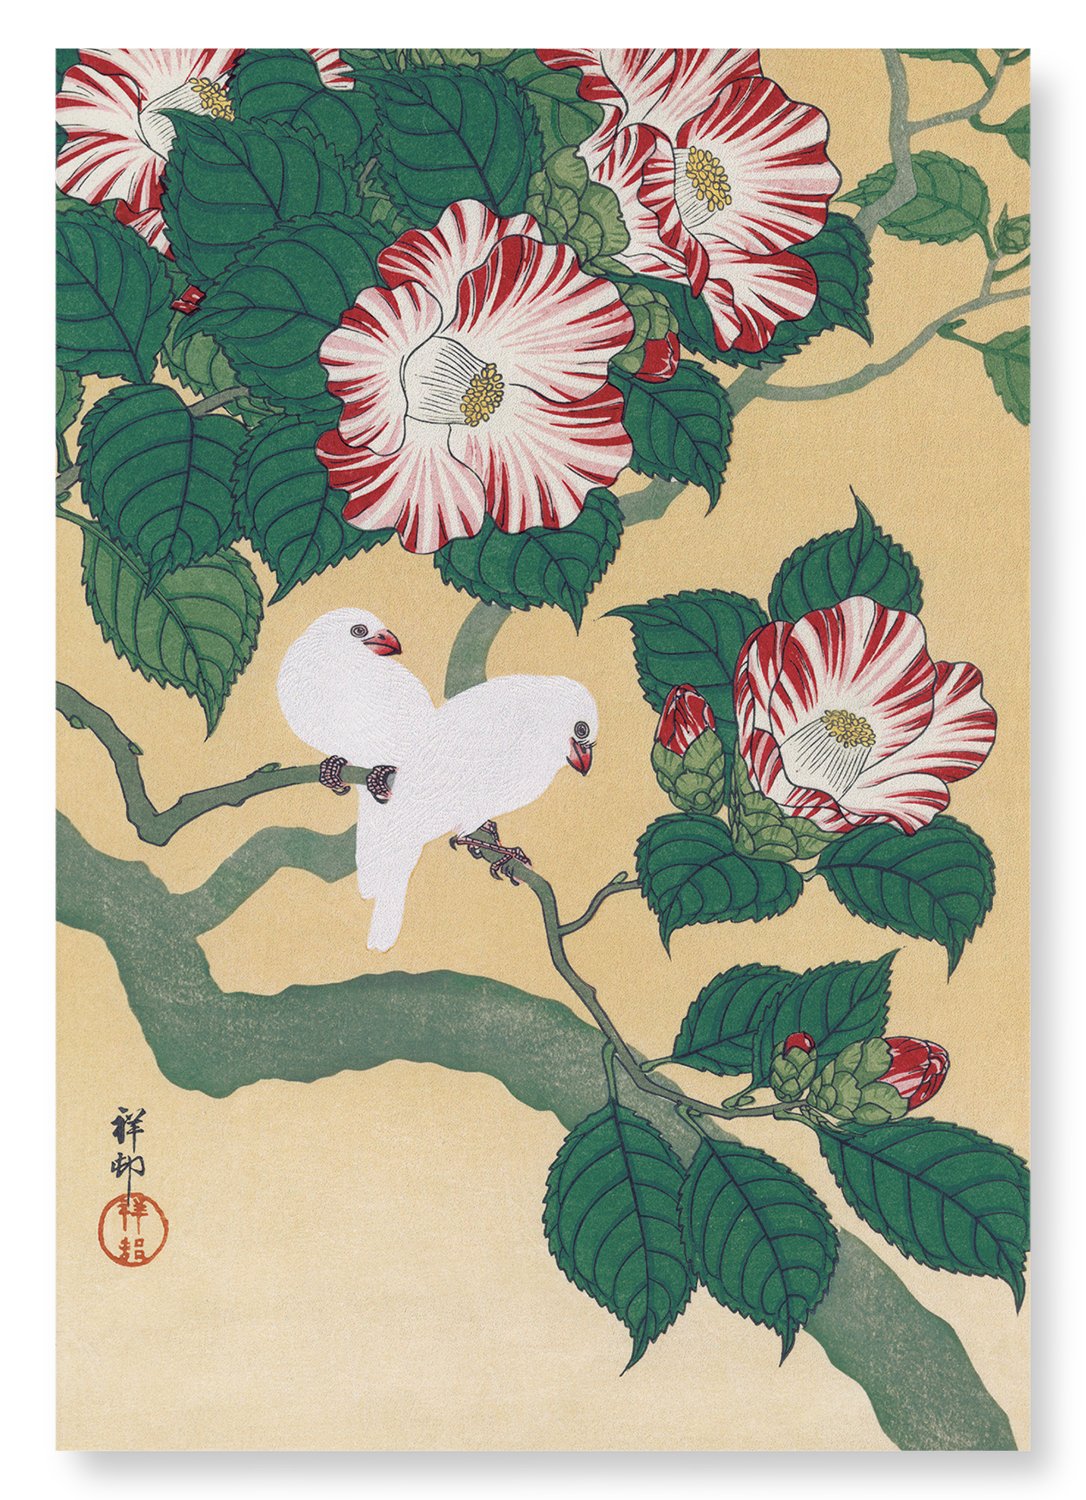 RICE BIRDS AND CAMELLIA